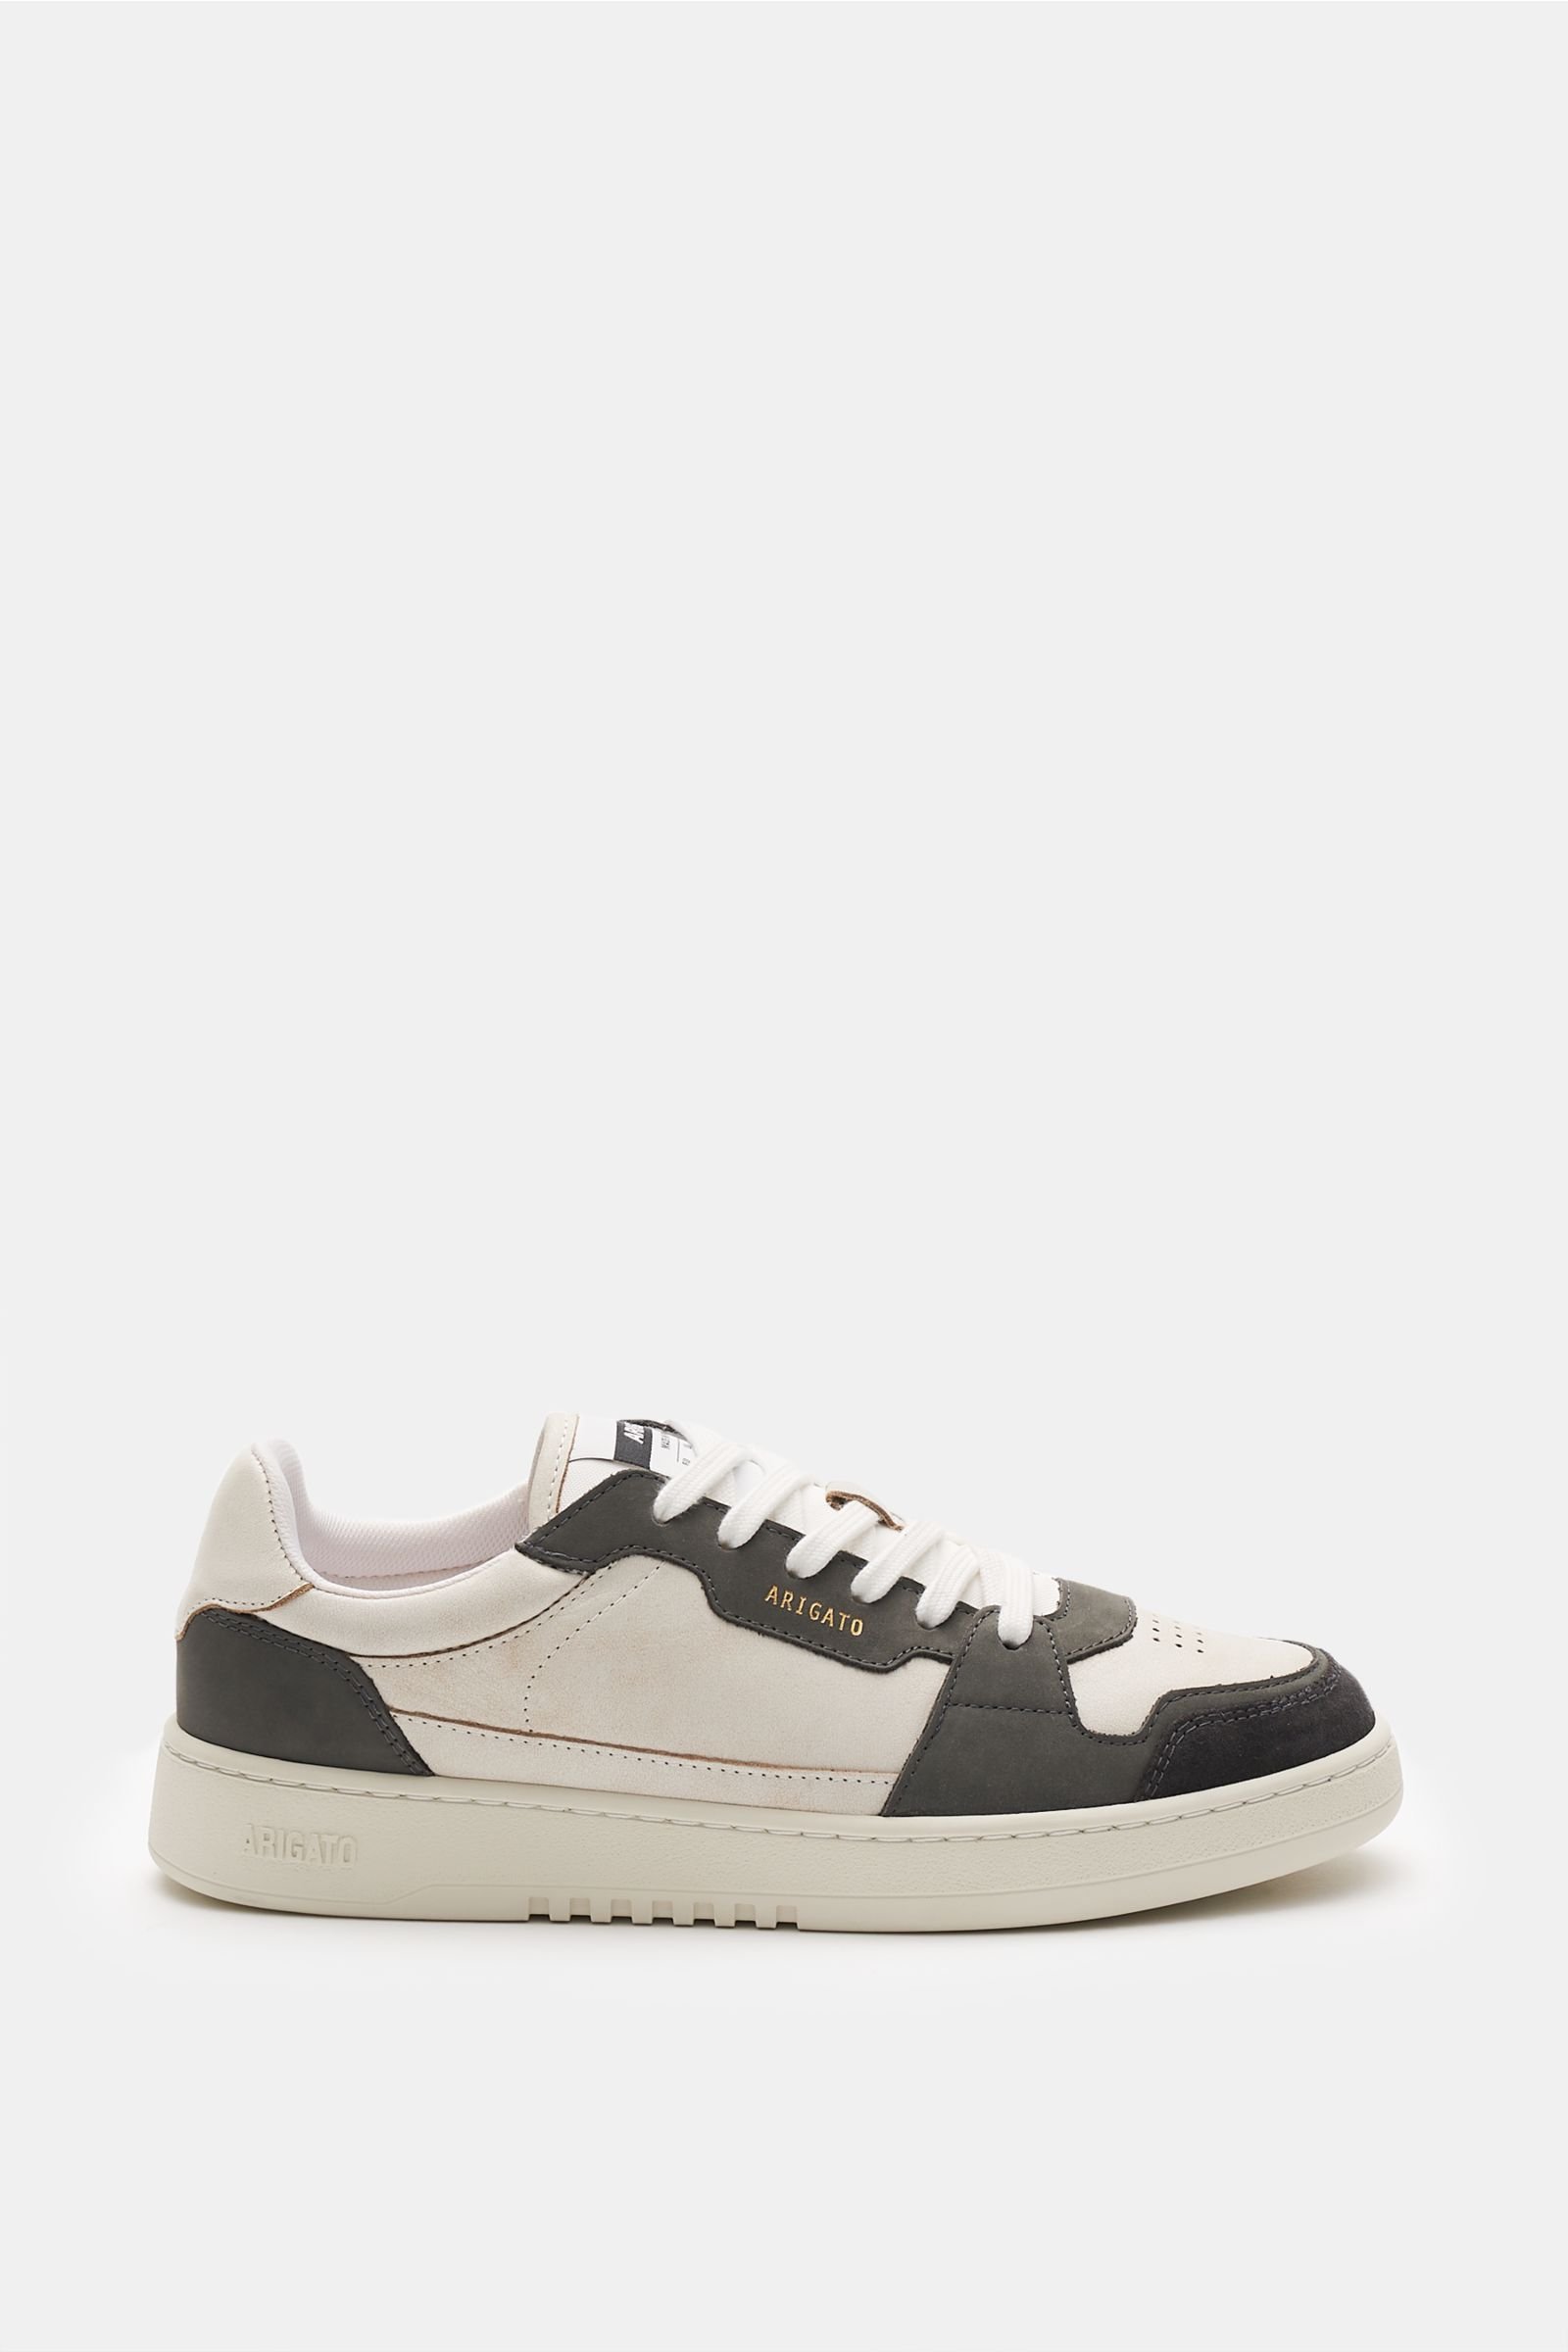 Sneakers 'Dice Lo' anthracite/beige